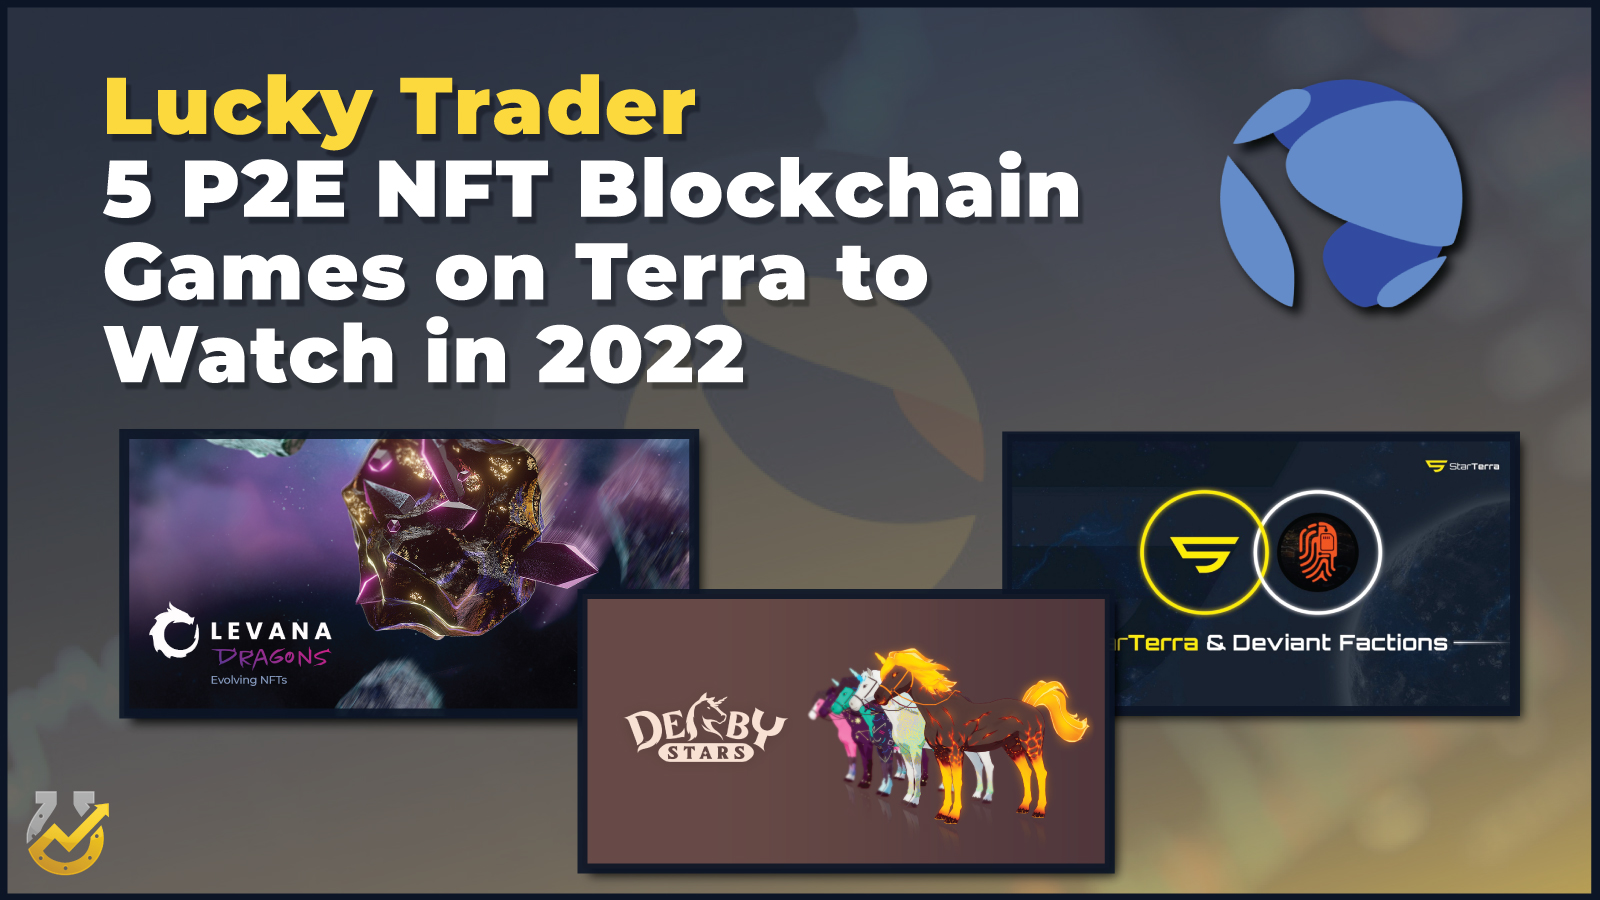 5 P2E NFT Blockchain Games on Terra to Watch in 2022